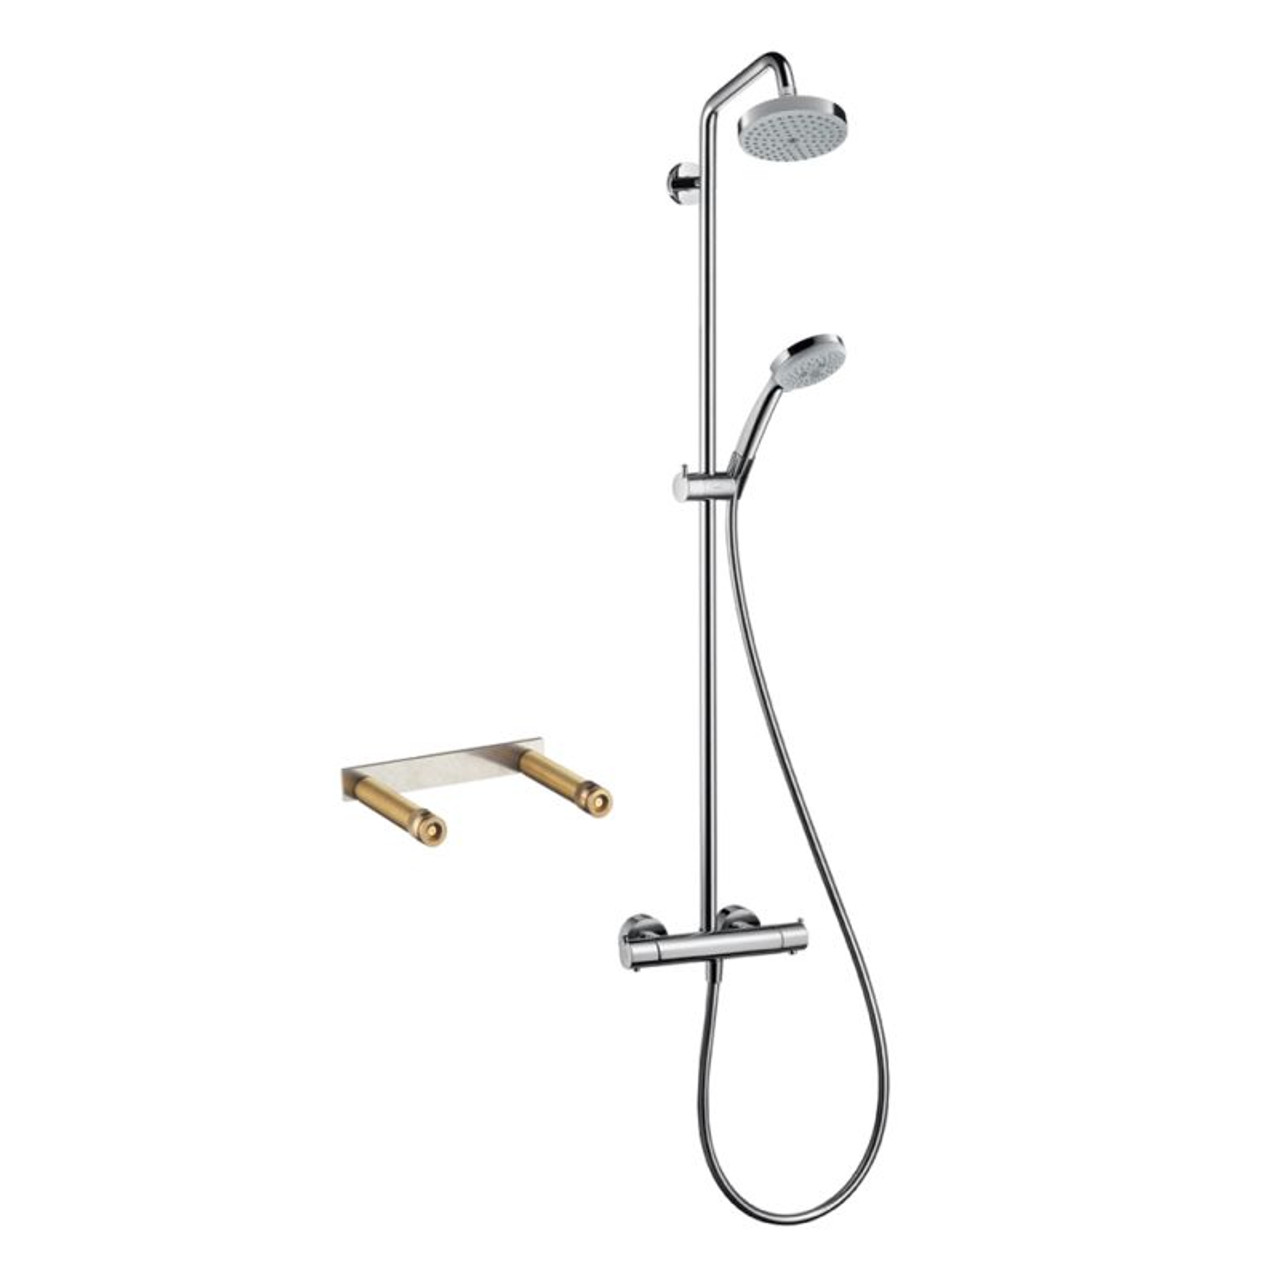 Croma Green Showerpipe With Thermostatic Basic Set Included in KS27169-16181CR Online - Bath1.com